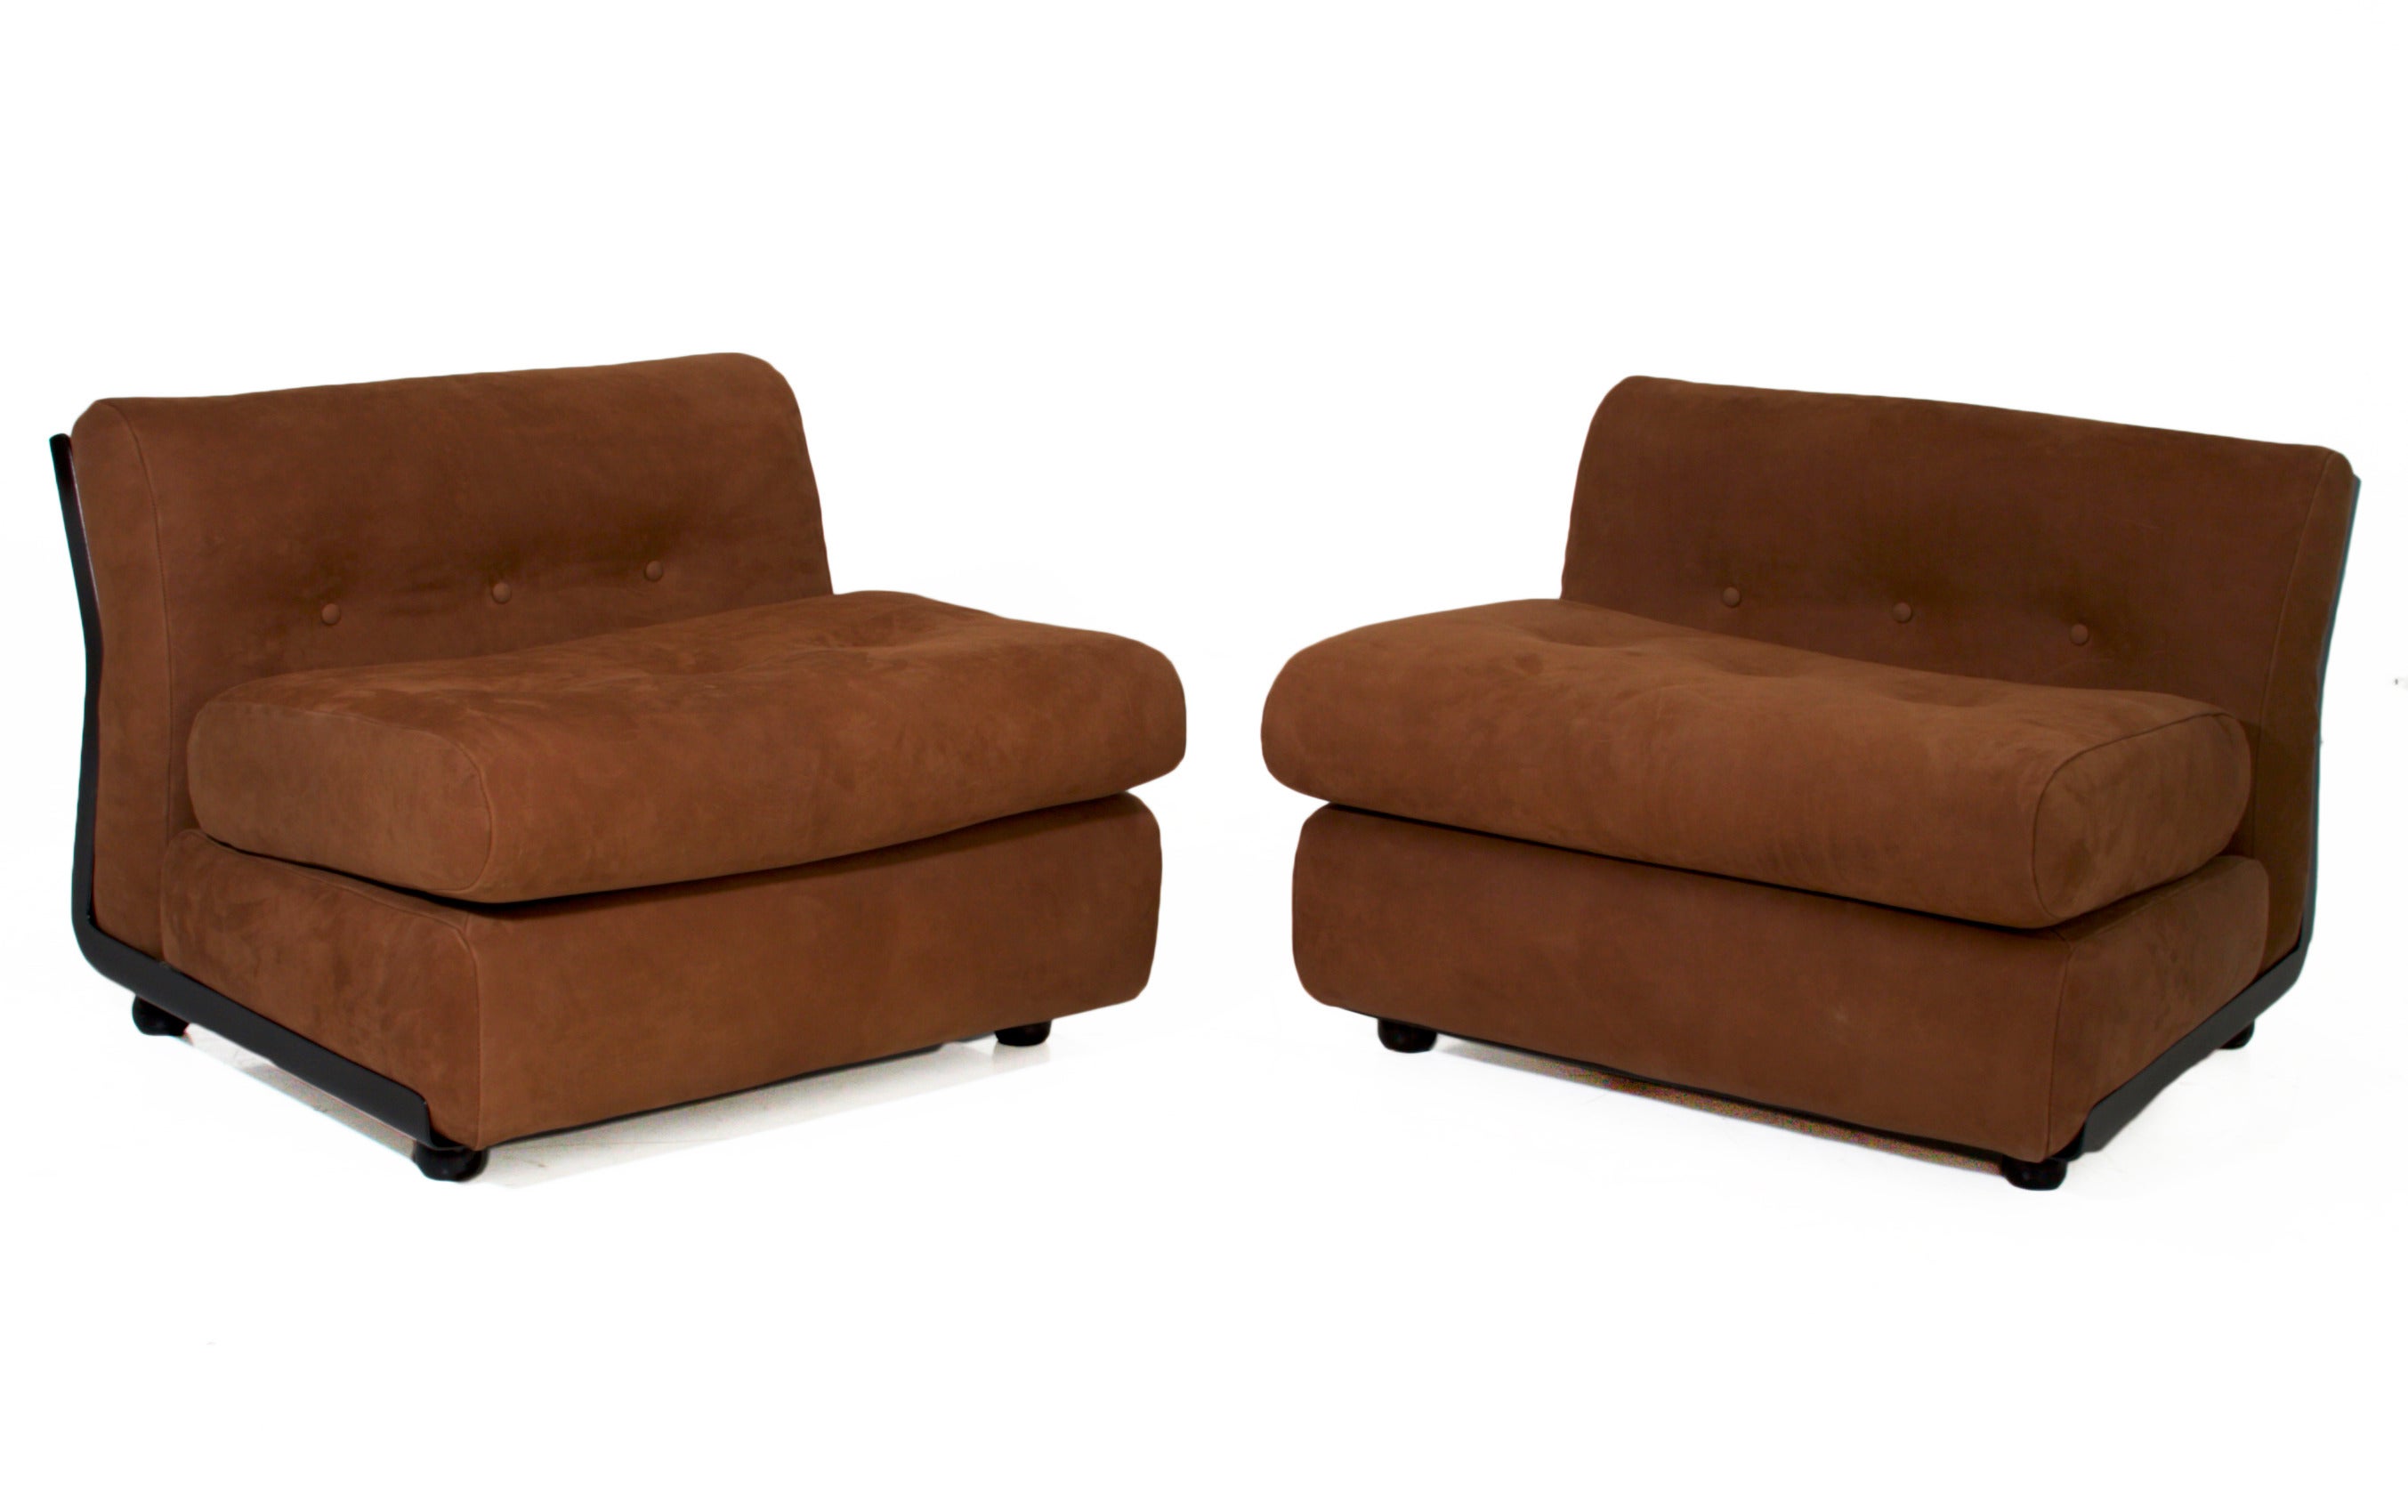 Pair of Tufted Suede Ebonized Fiberglass Lounge Chairs Attributed Metropolitan For Sale